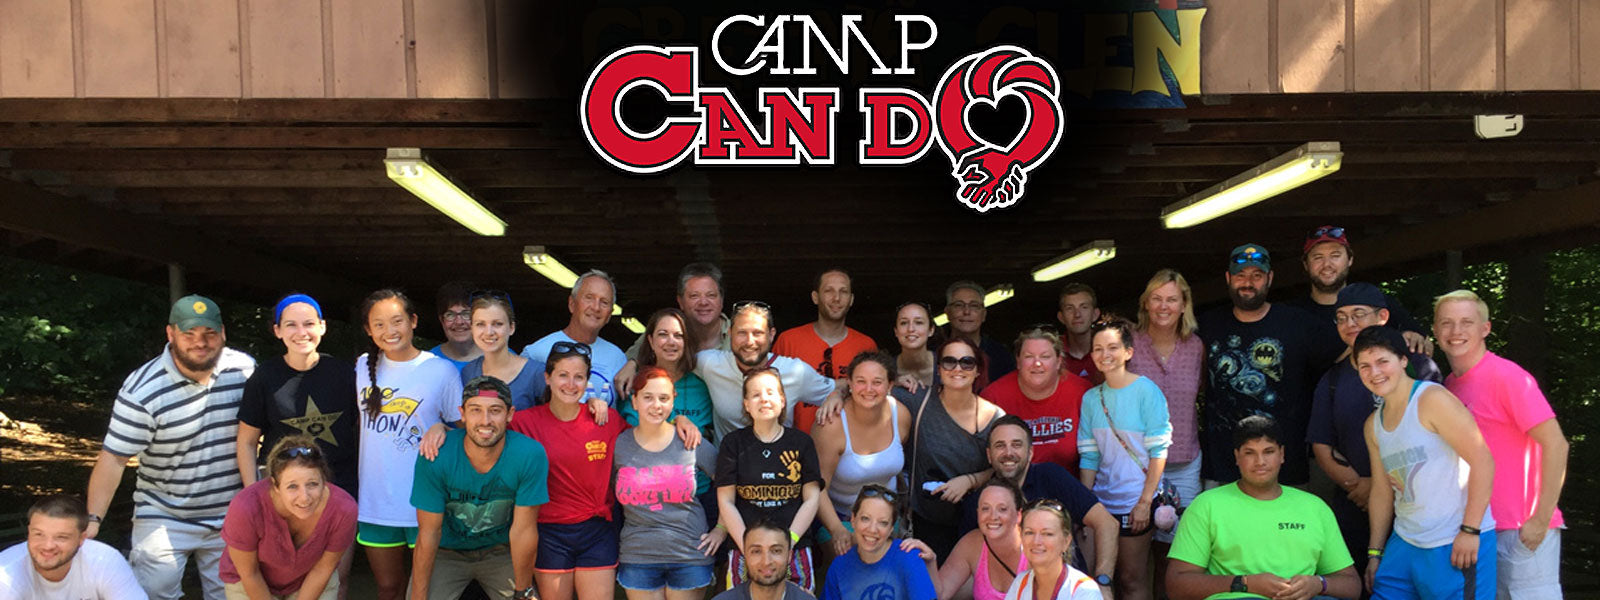 Camp Can Do Group Photo